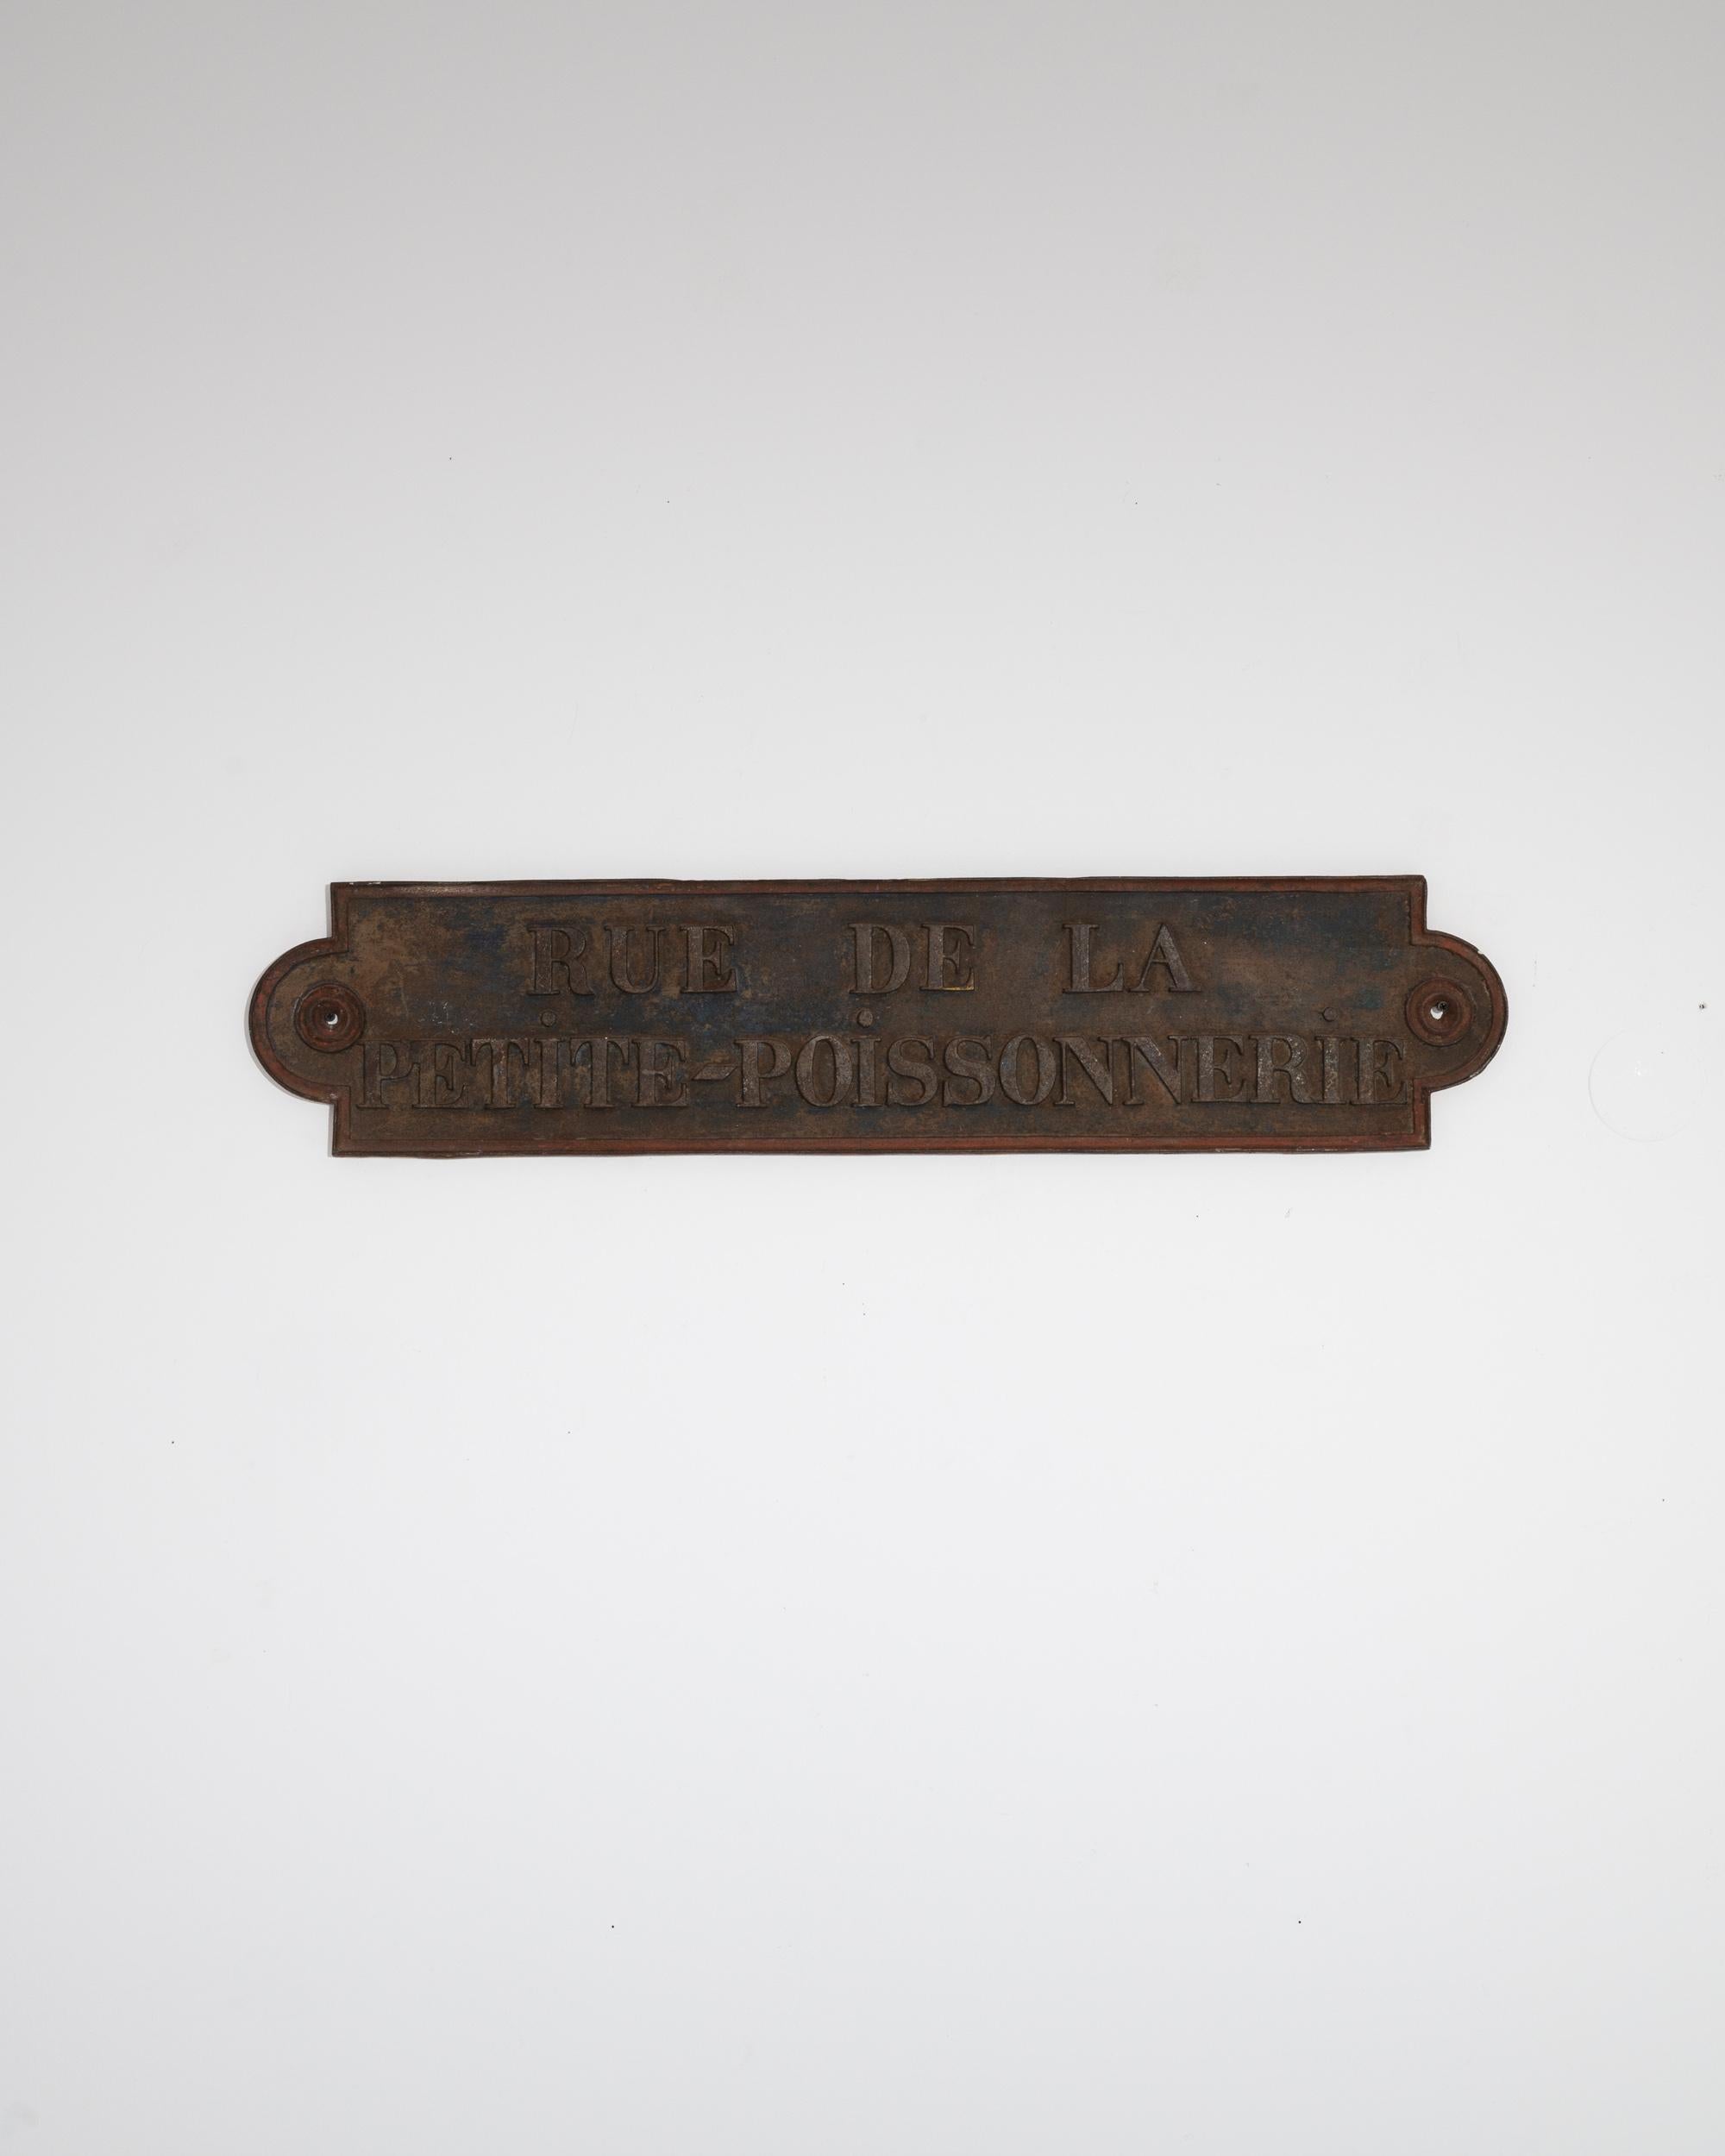 A unique and poignant vintage piece, this cast iron street sign offers a glimpse of bygone Paris. Used around the turn of the century, the street which the sign designates —rue de la petite poissonnerie, or street of the small fish market —no longer